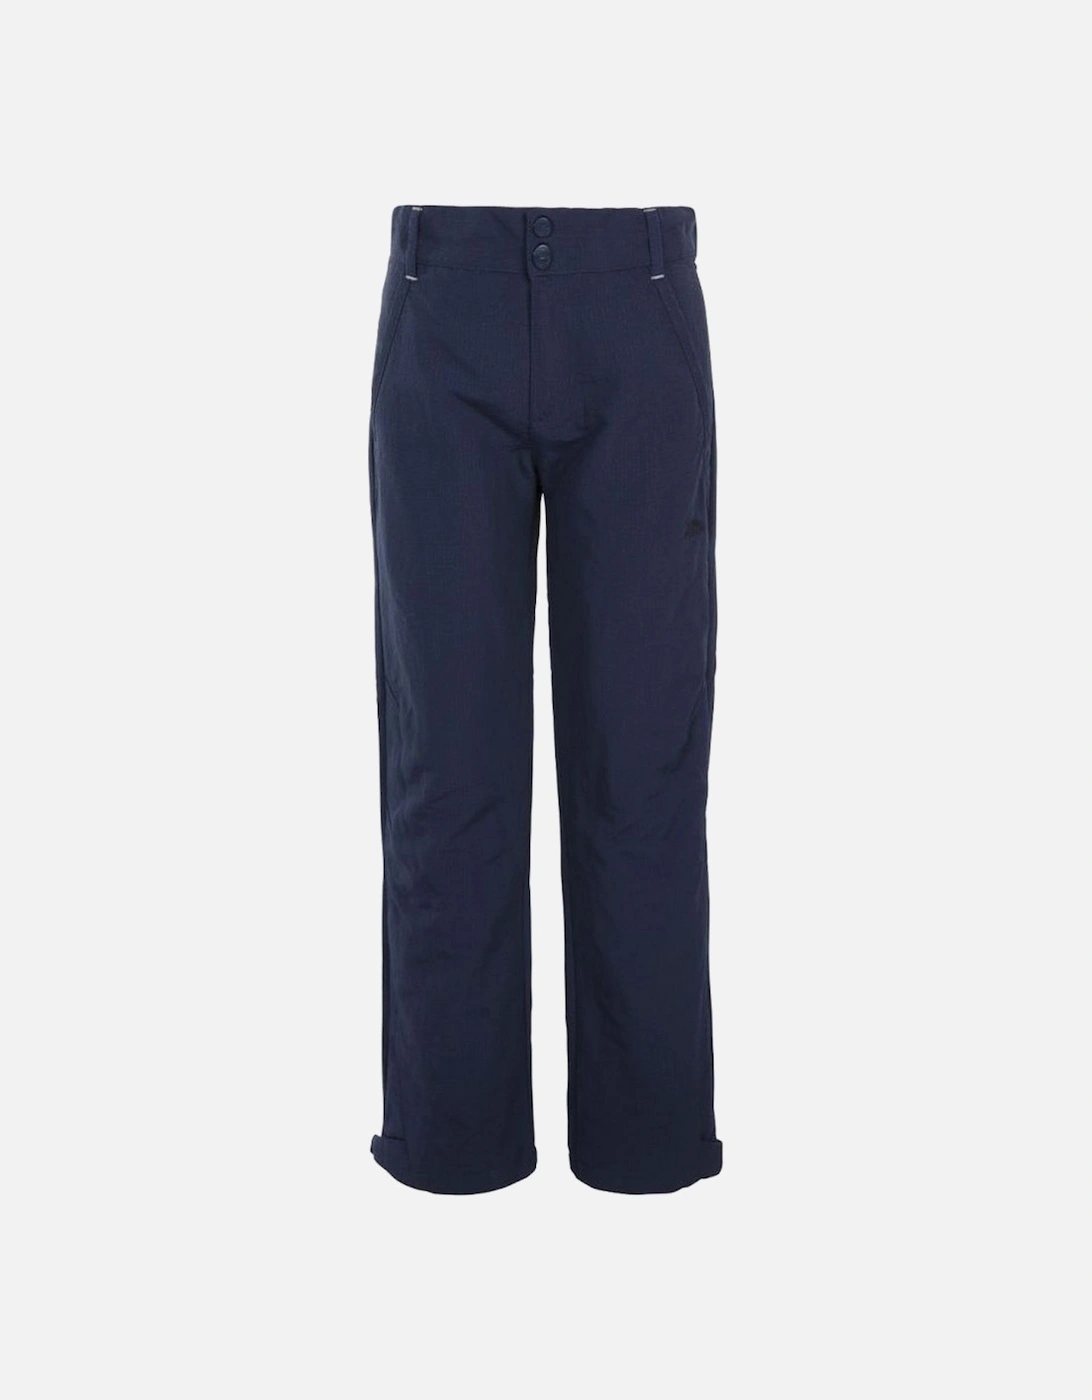 Childrens/Kids Decisive Trousers, 4 of 3